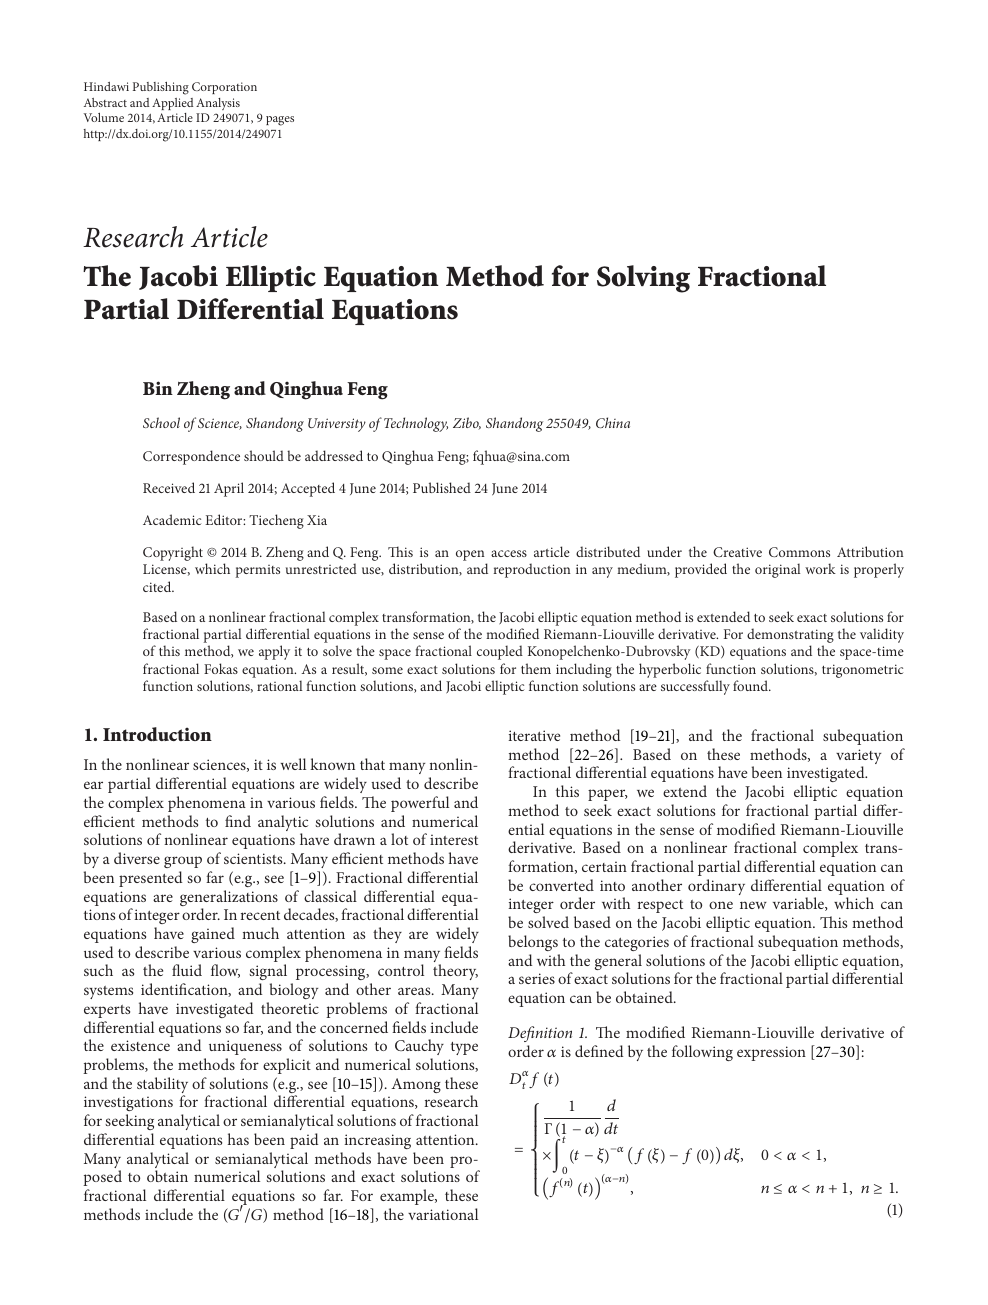 The Jacobi Elliptic Equation Method For Solving Fractional Partial Differential Equations Topic Of Research Paper In Mathematics Download Scholarly Article Pdf And Read For Free On Cyberleninka Open Science Hub